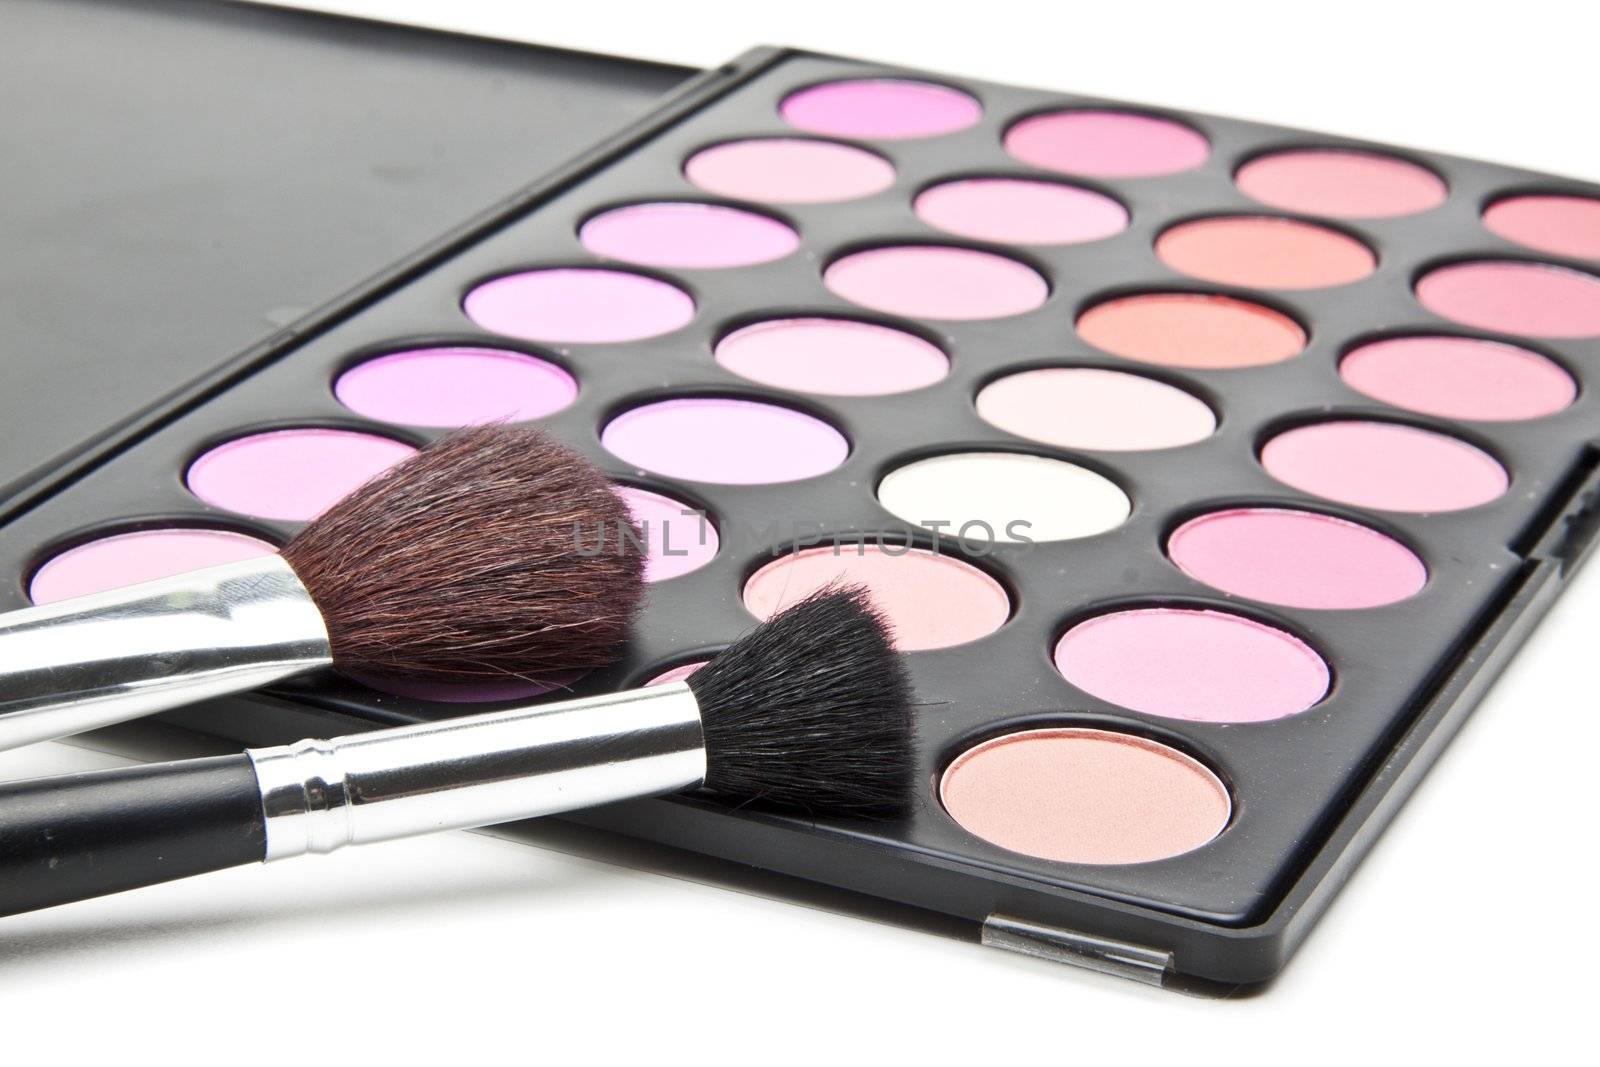 Makeup brushes and make-up eye shadows by ozaiachin